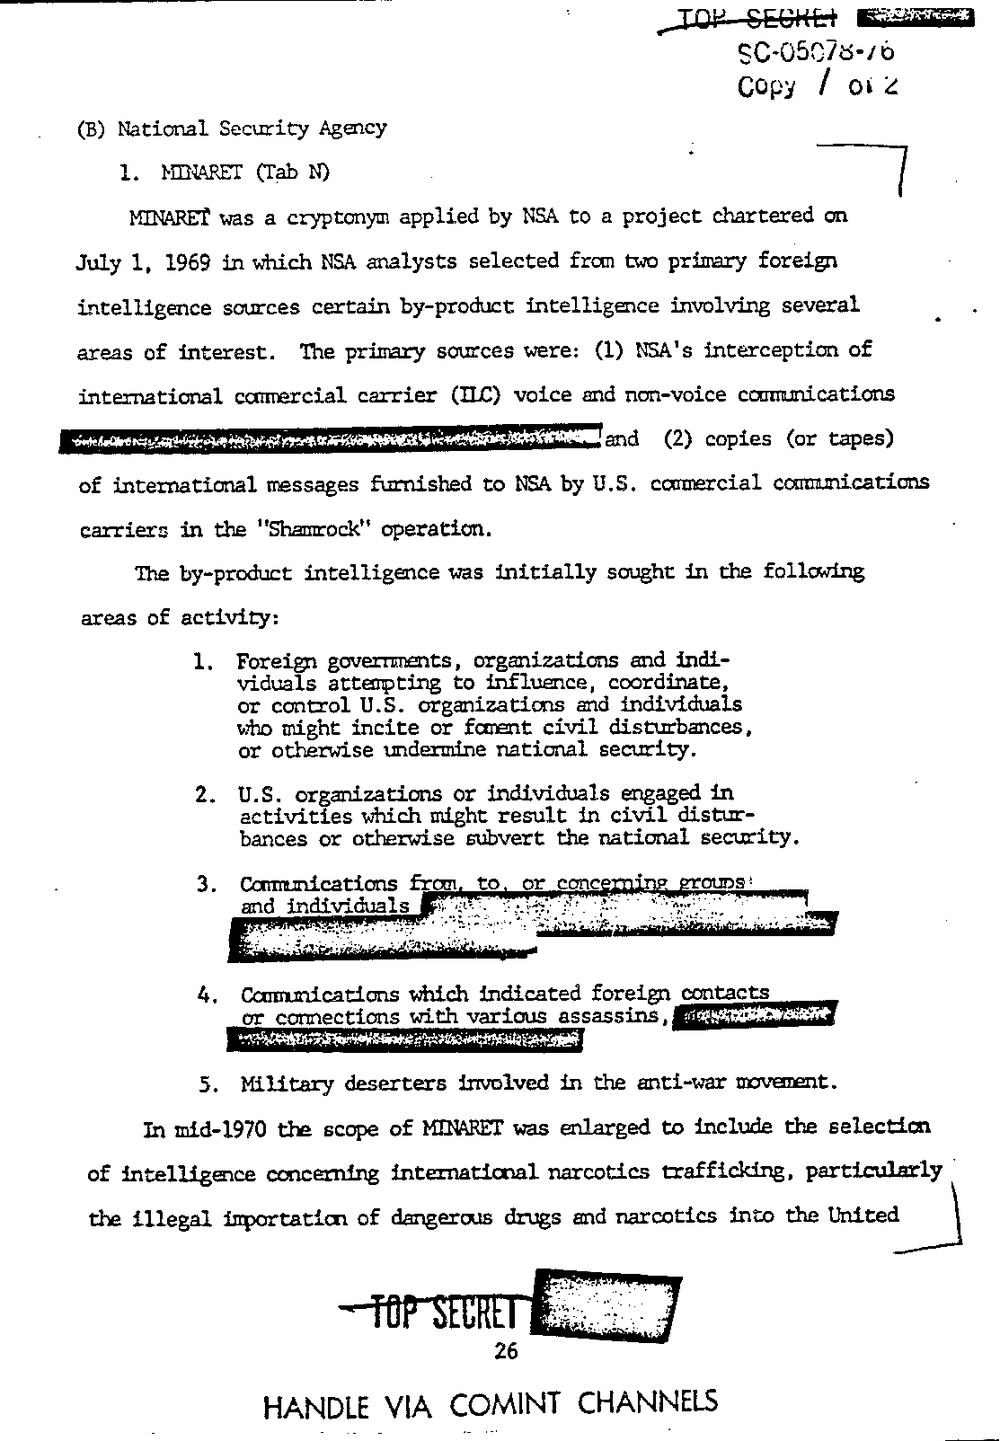 Page 34 from Report on Inquiry Into CIA Related Electronic Surveillance Activities